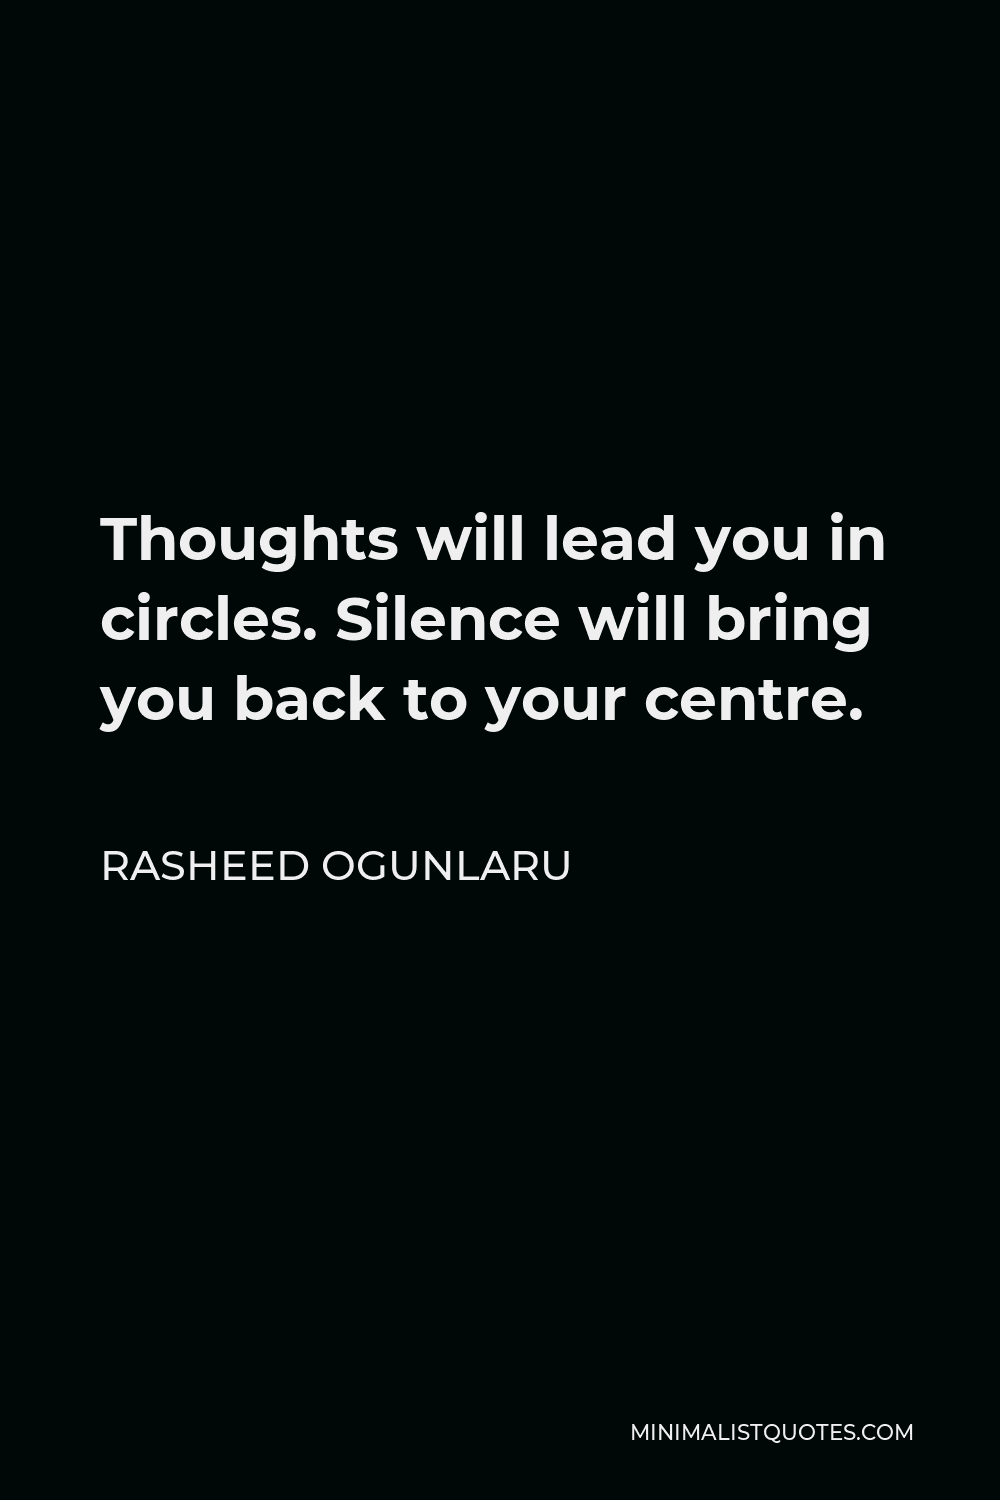 Rasheed Ogunlaru Quote - Thoughts will lead you in circles. Silence will bring you back to your centre.